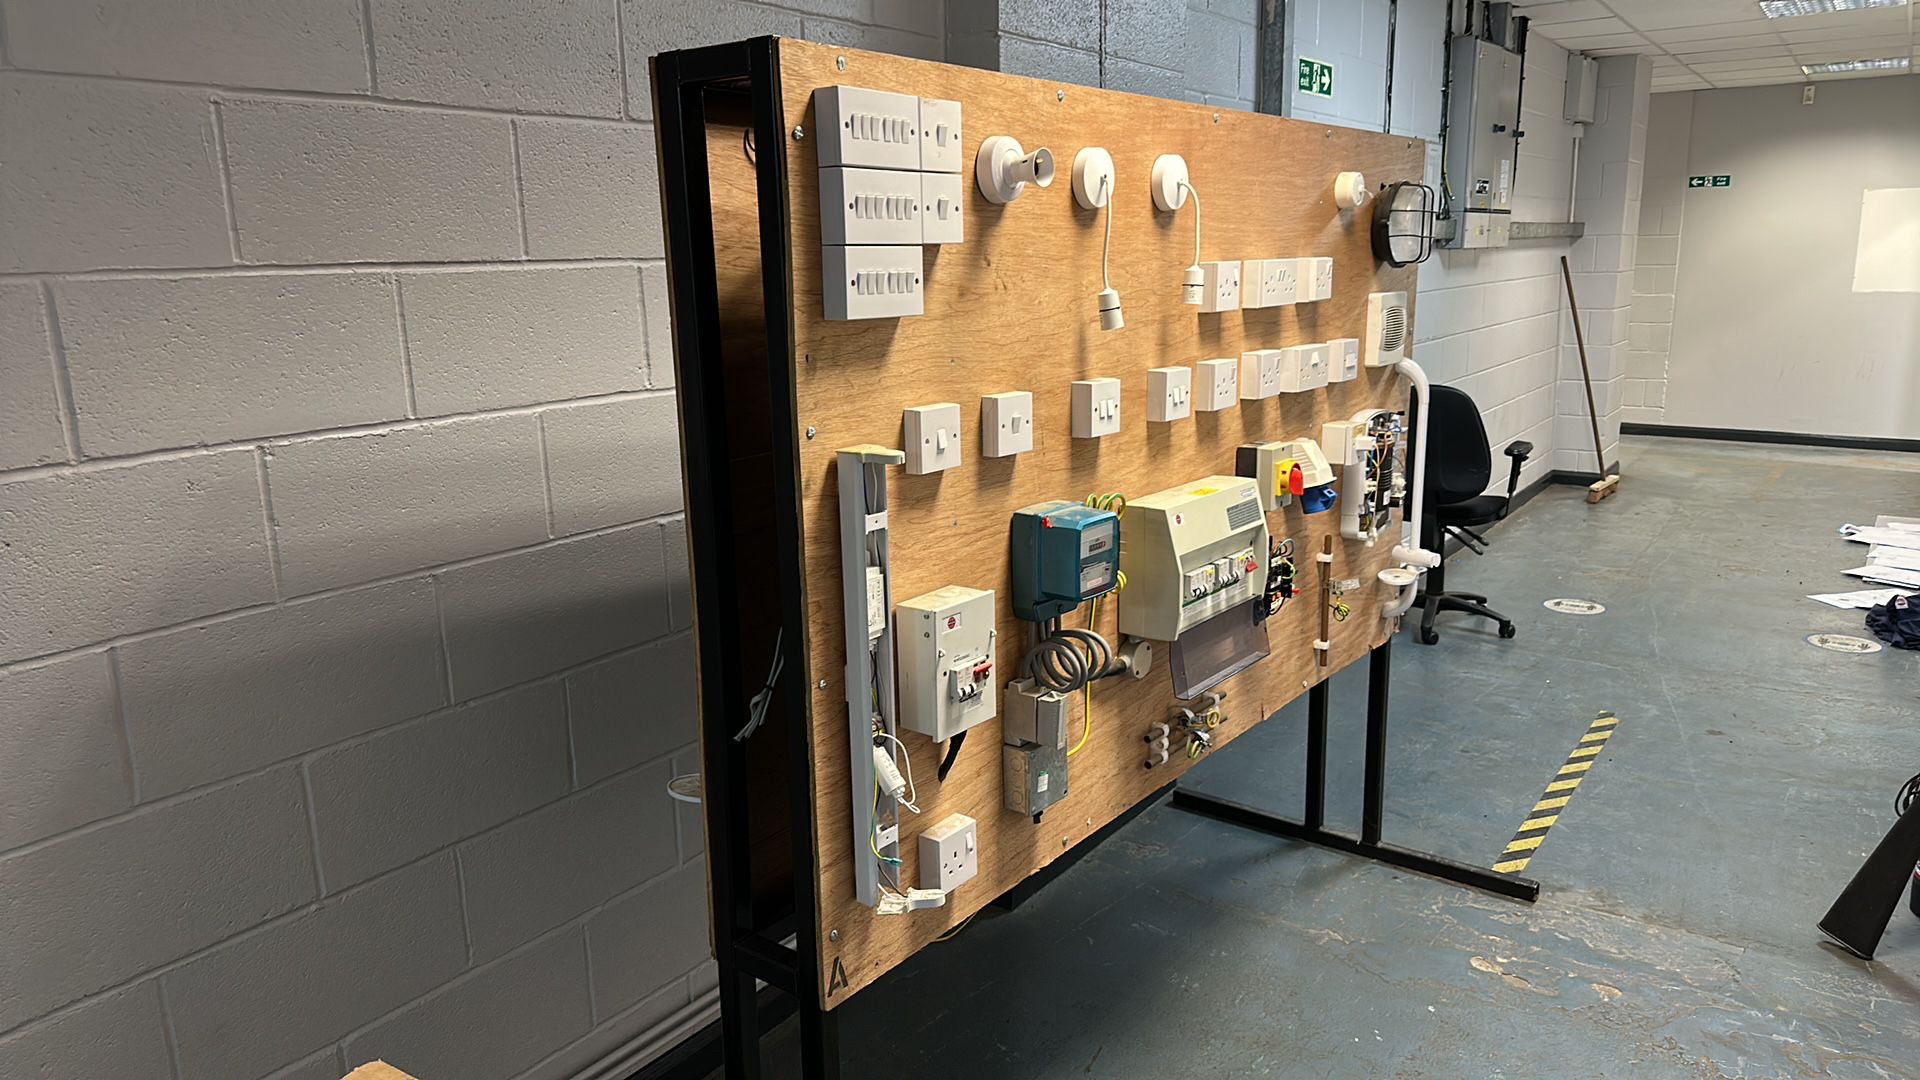 College Electrical Training Board - Image 4 of 4